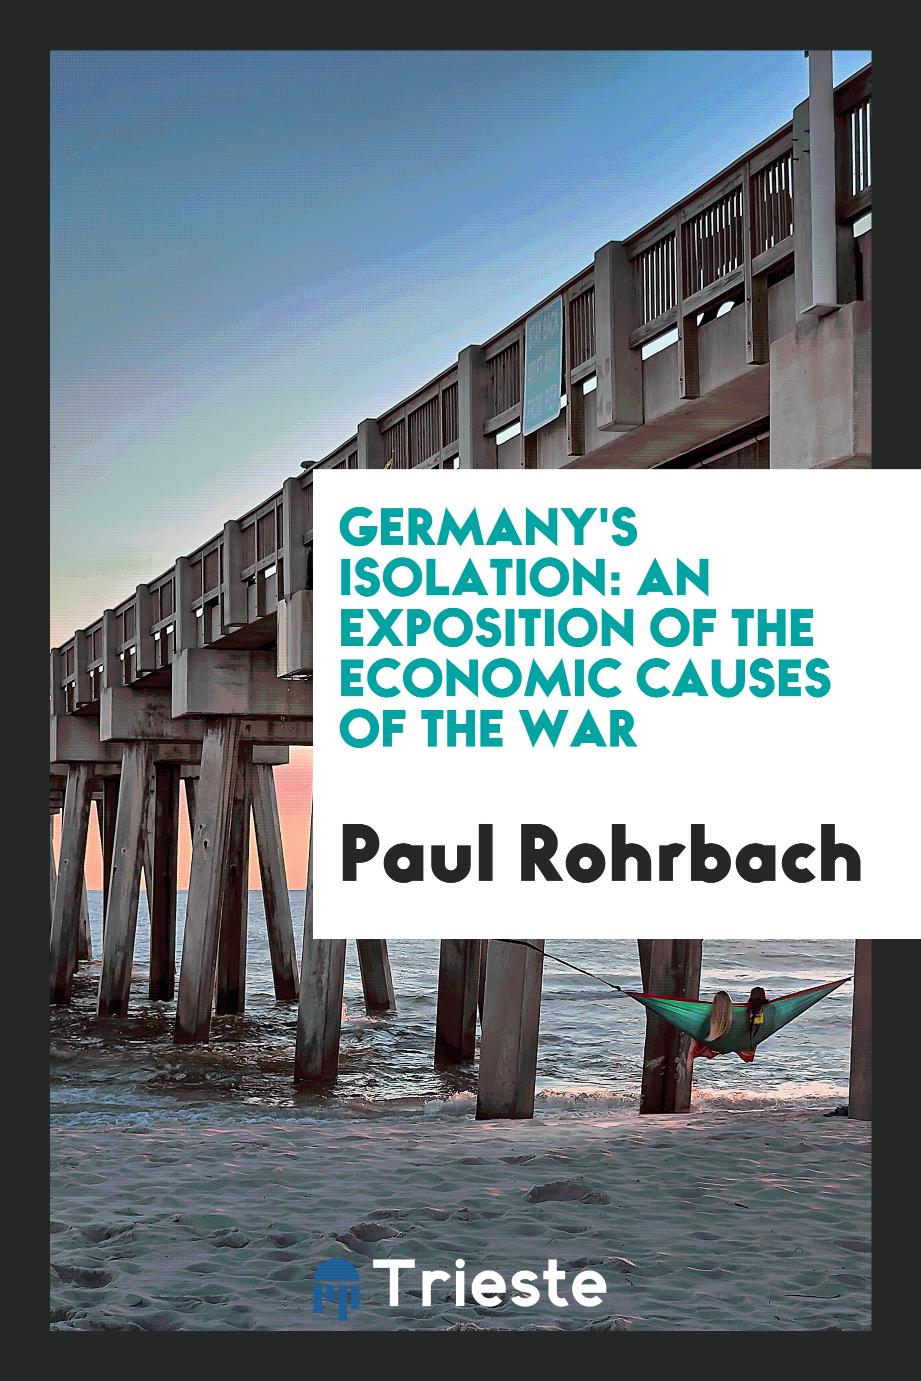 Germany's Isolation: An Exposition of the Economic Causes of the War